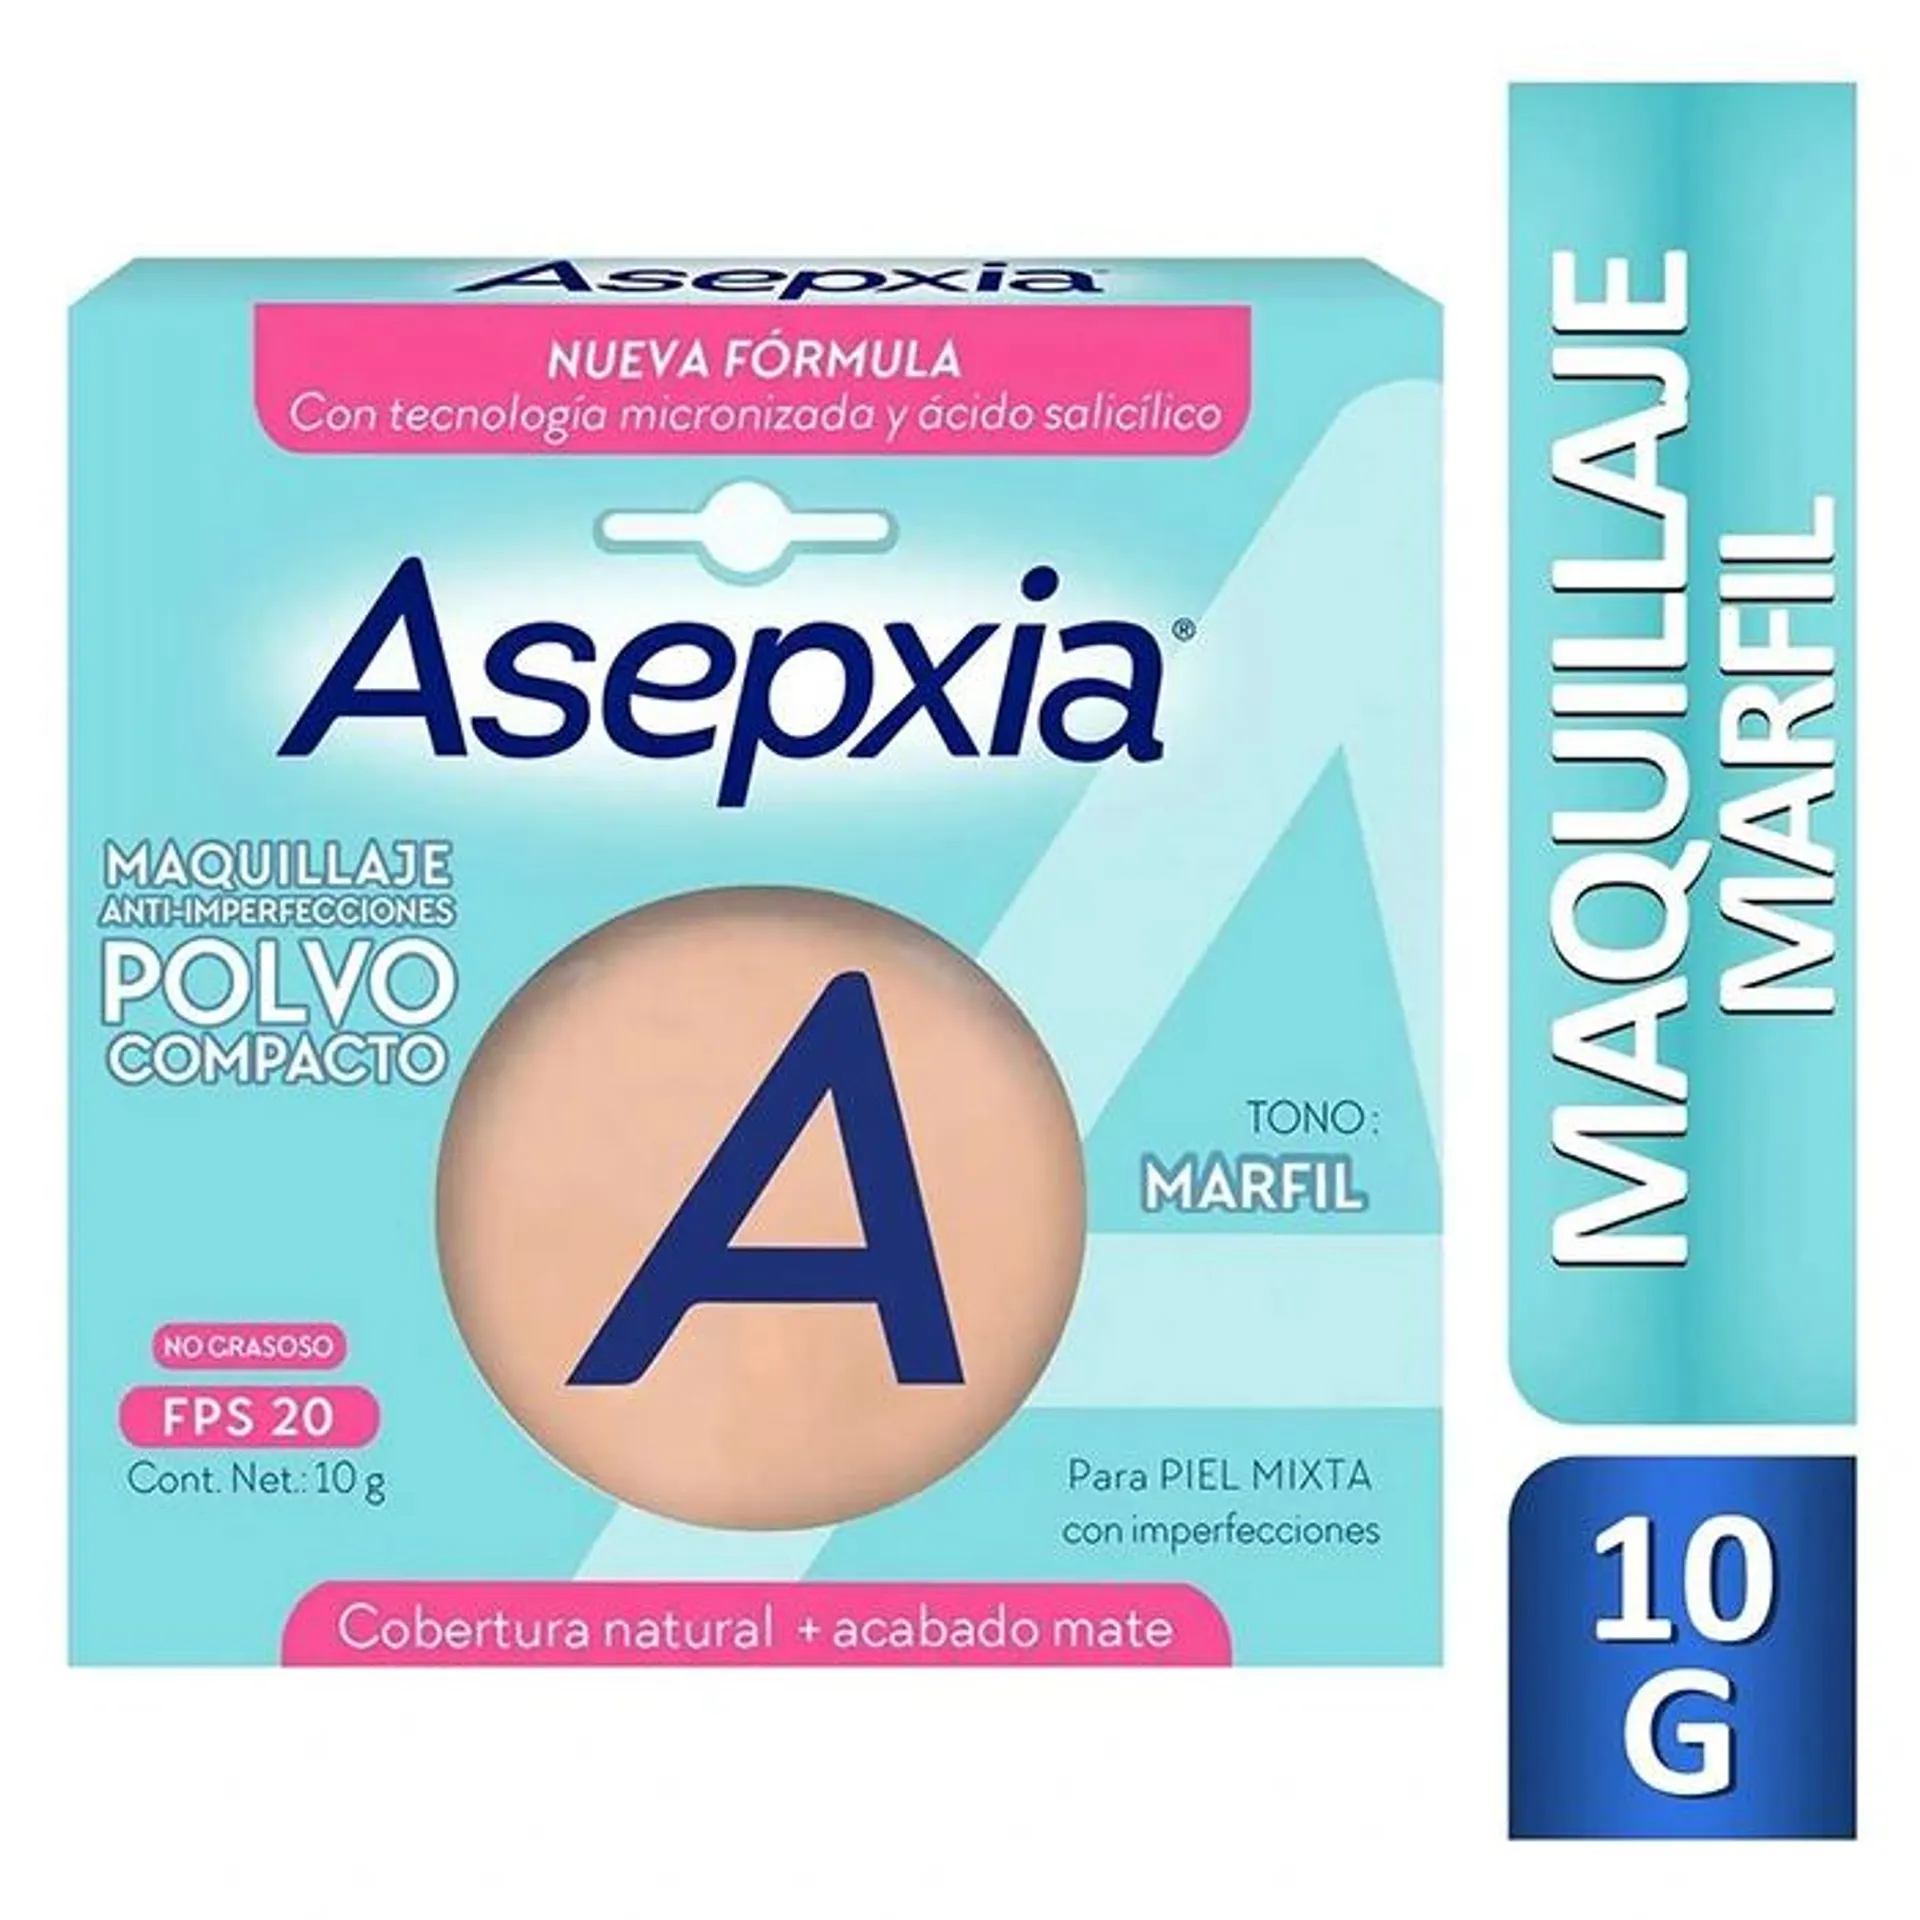 Asepxia Maquillaje Facial Polvo Compacto Antiacne Marfil 10G